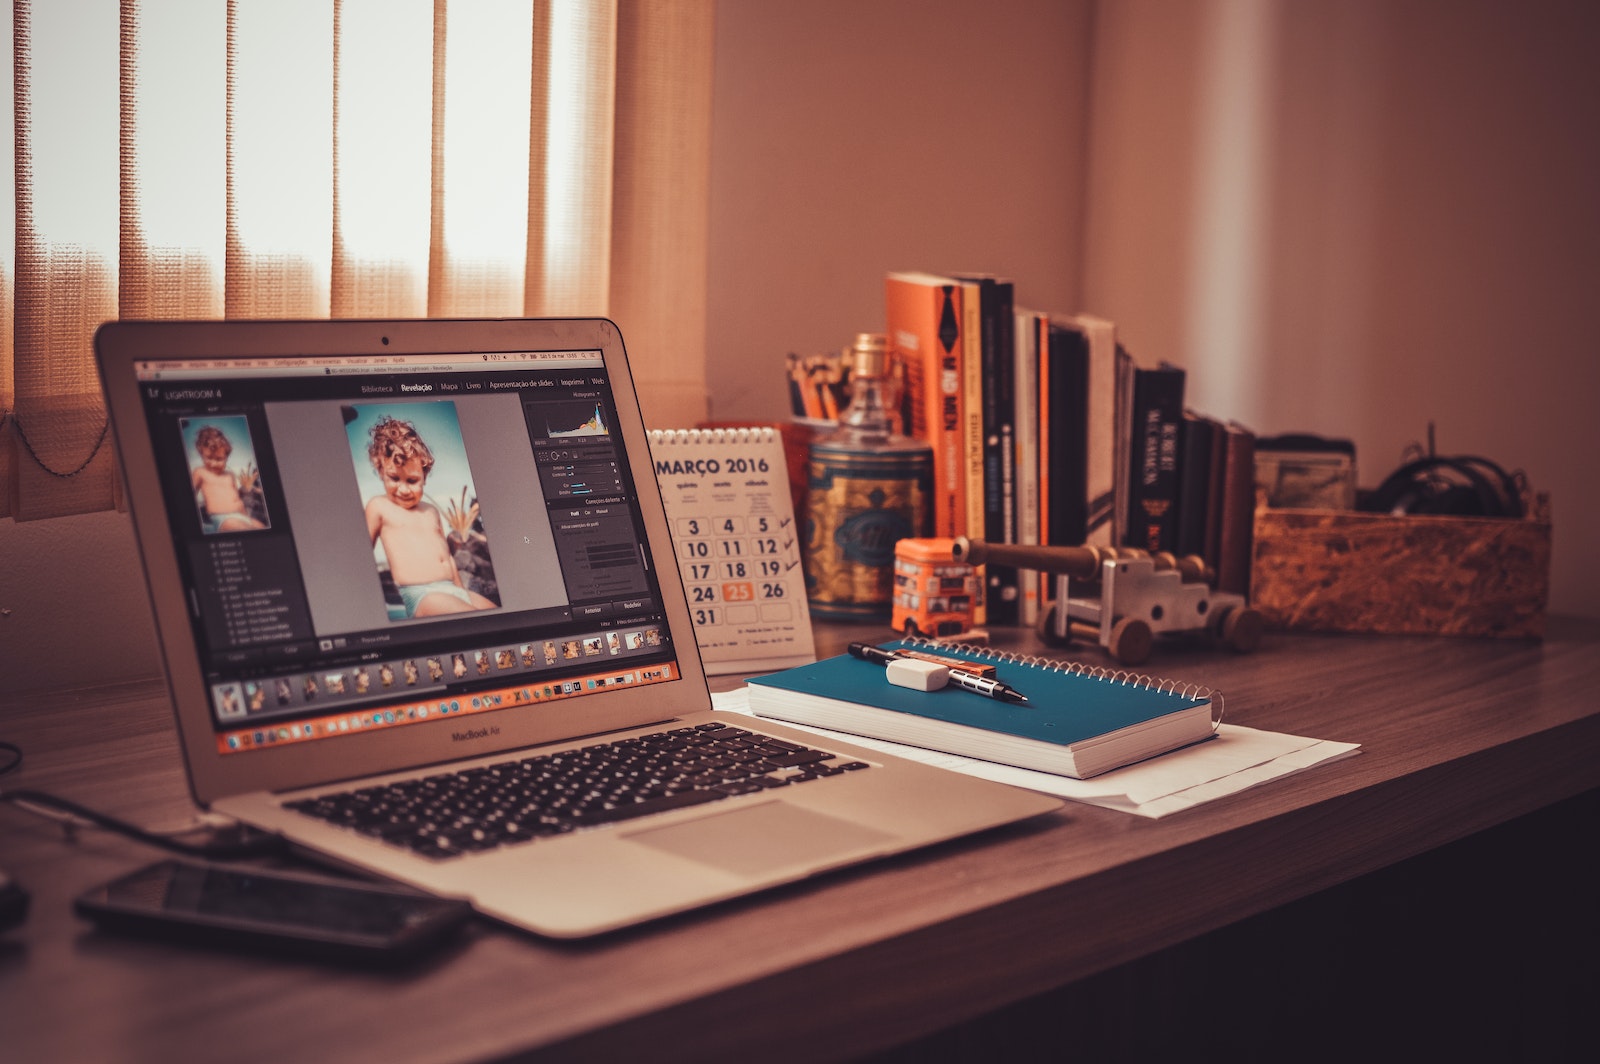 Find Out How to Use Color Grading in Adobe Photoshop